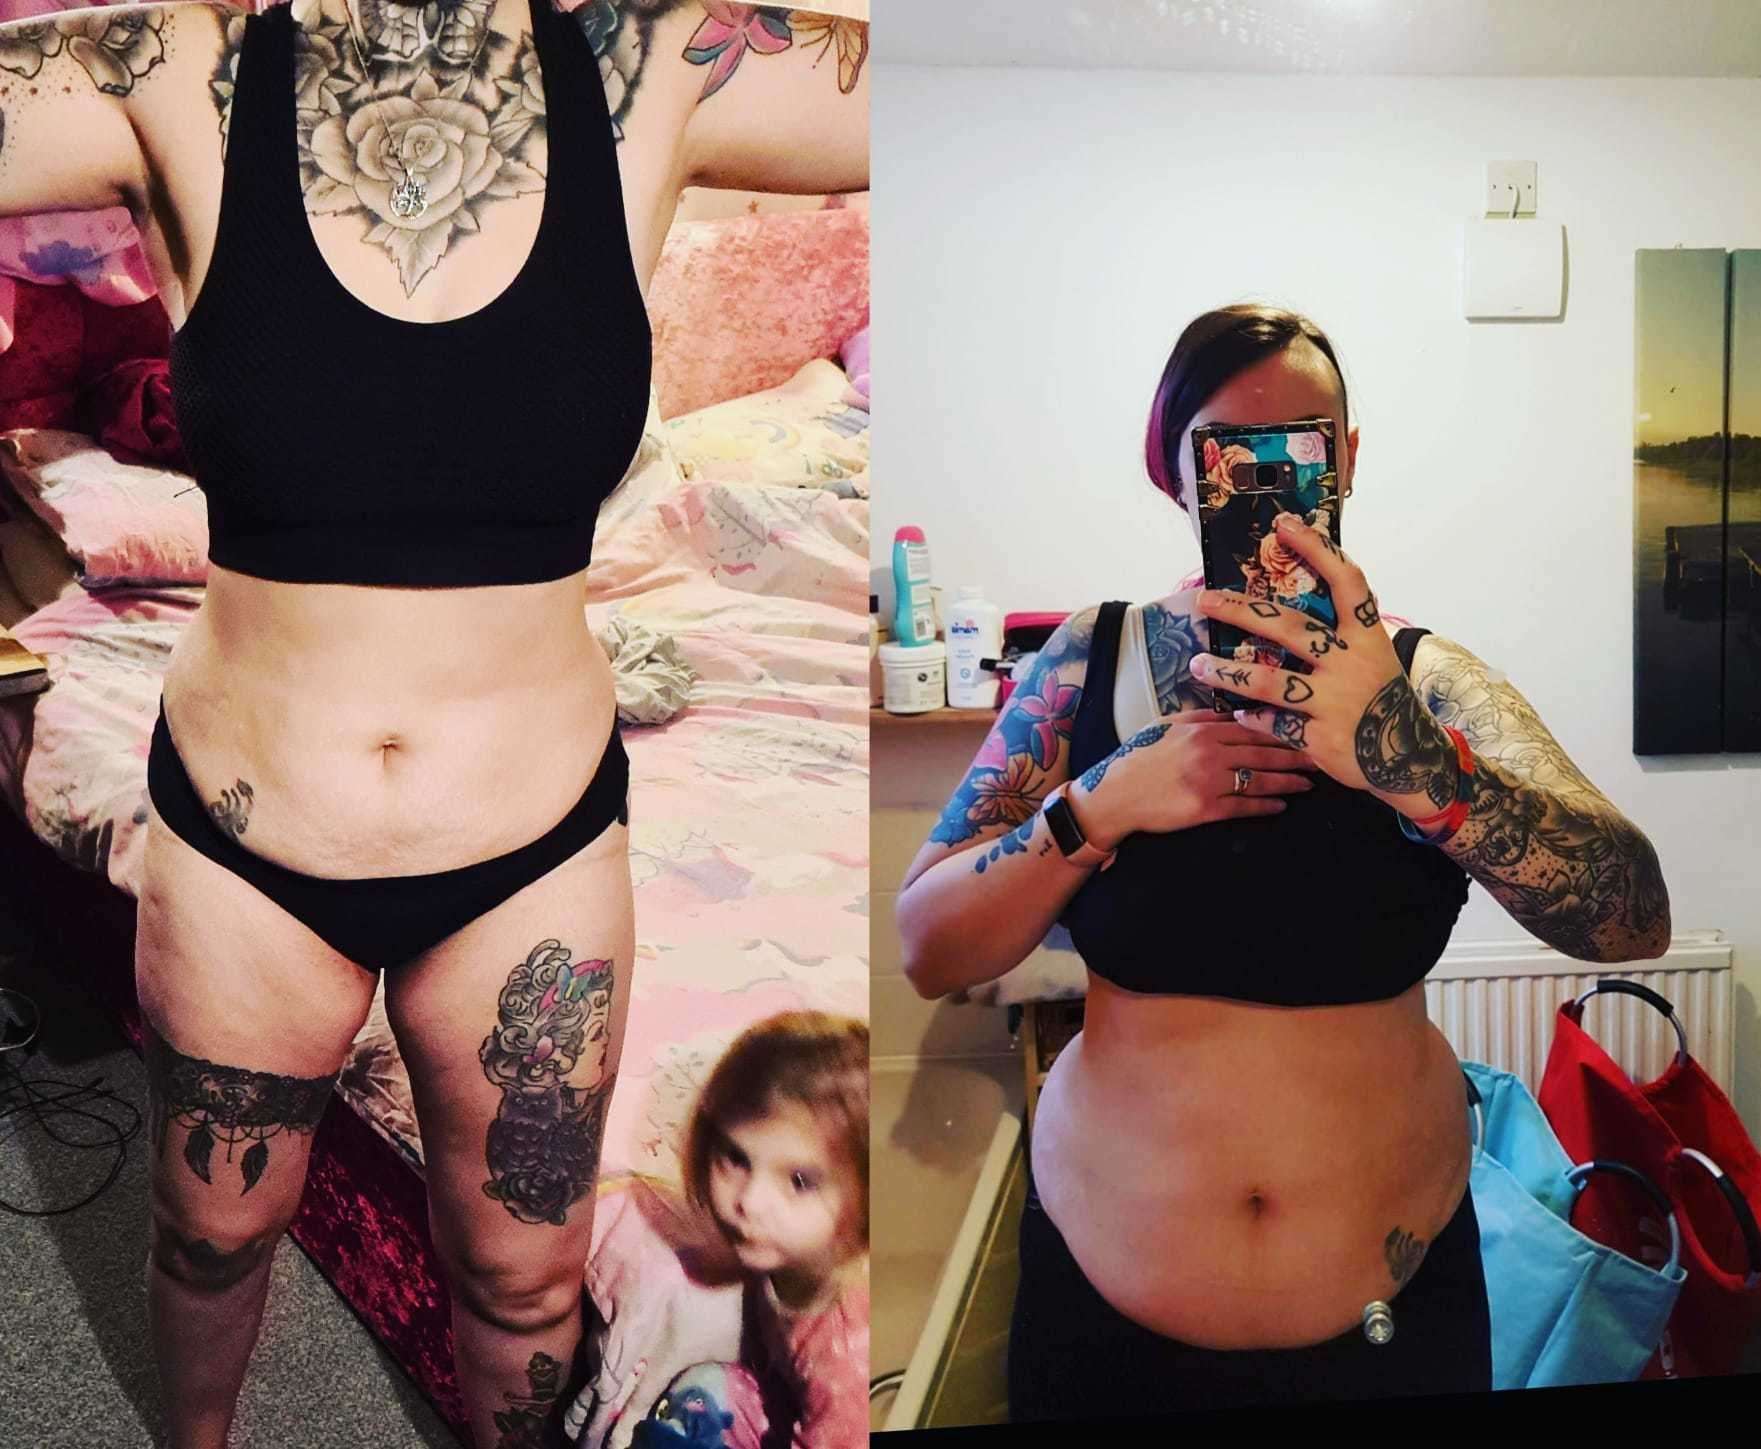 Becky: "Two years after having my last baby, I became fed up with the way I looked. I promised myself that I would focus on myself this year, practice fitness, and abandon unhealthy eating, at least for one month."